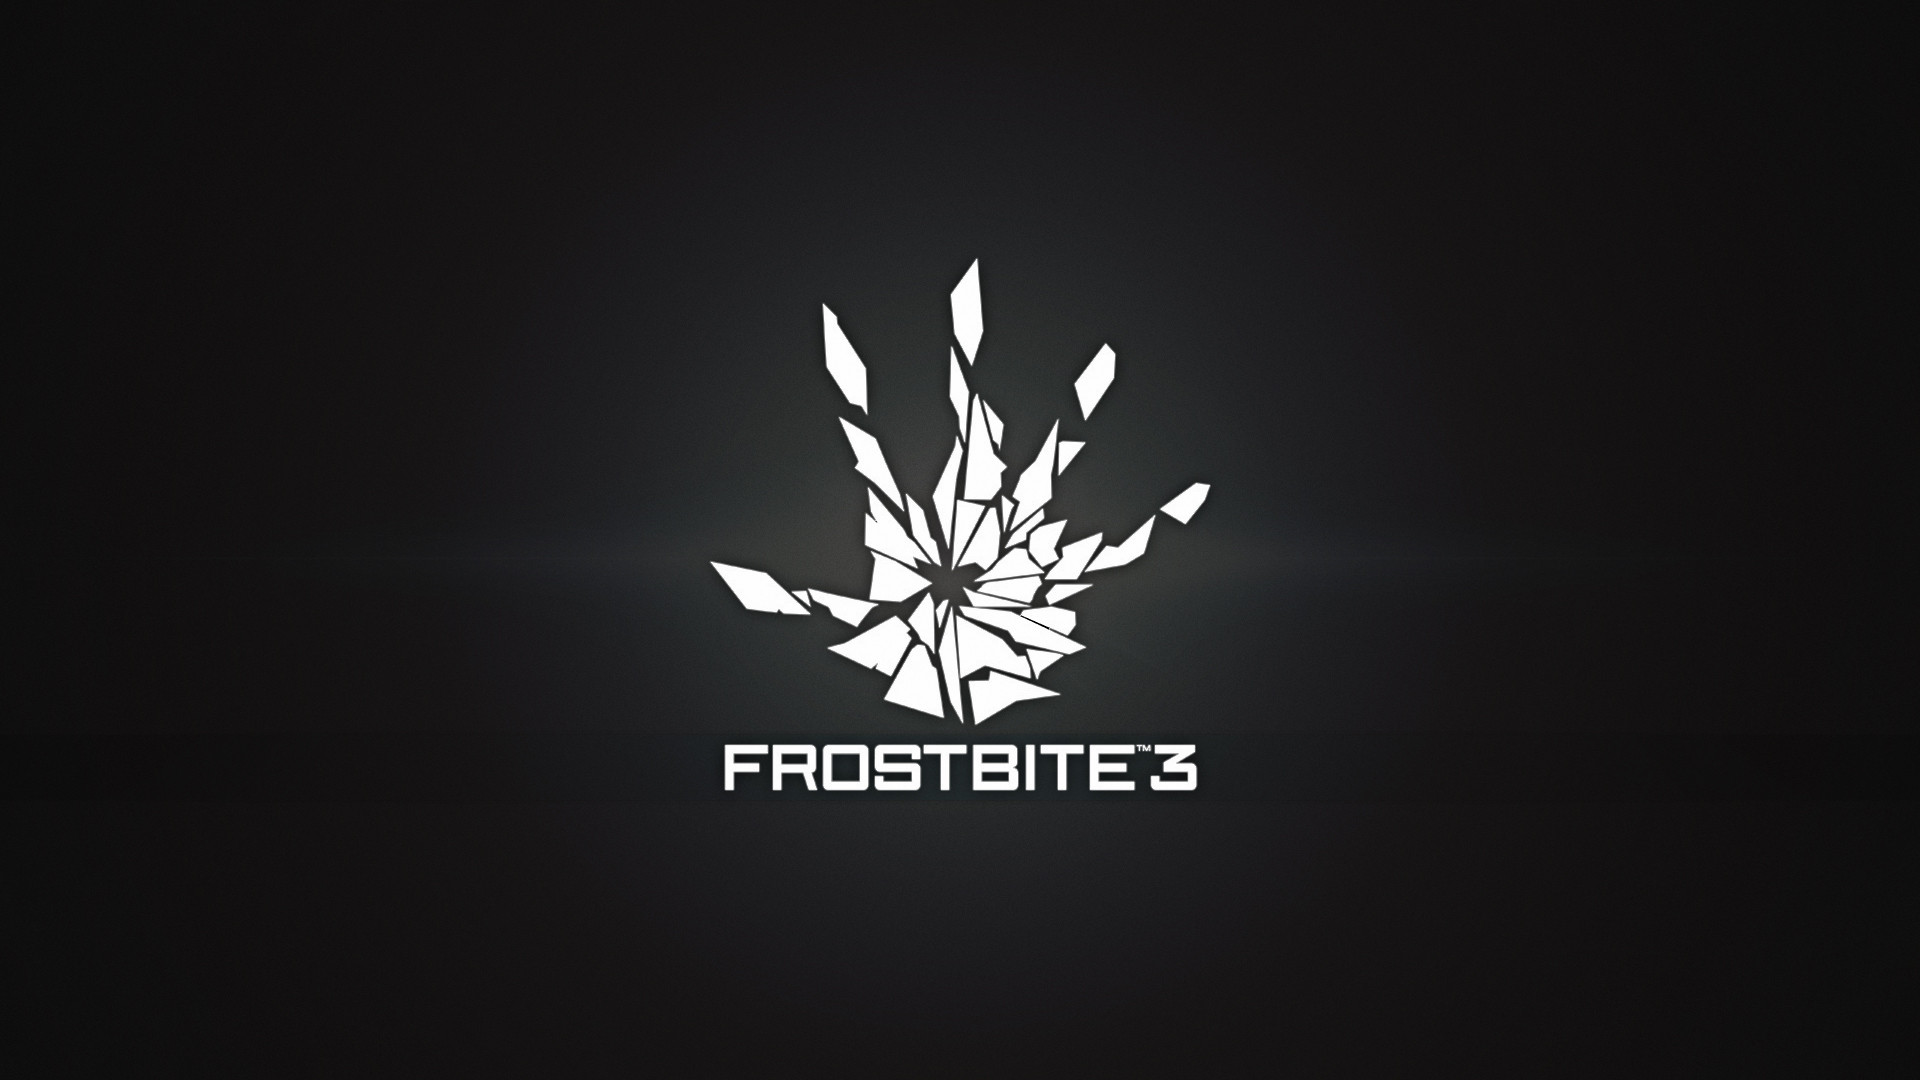 So Among All New Frostbite Wallpaper That Have Been Created I